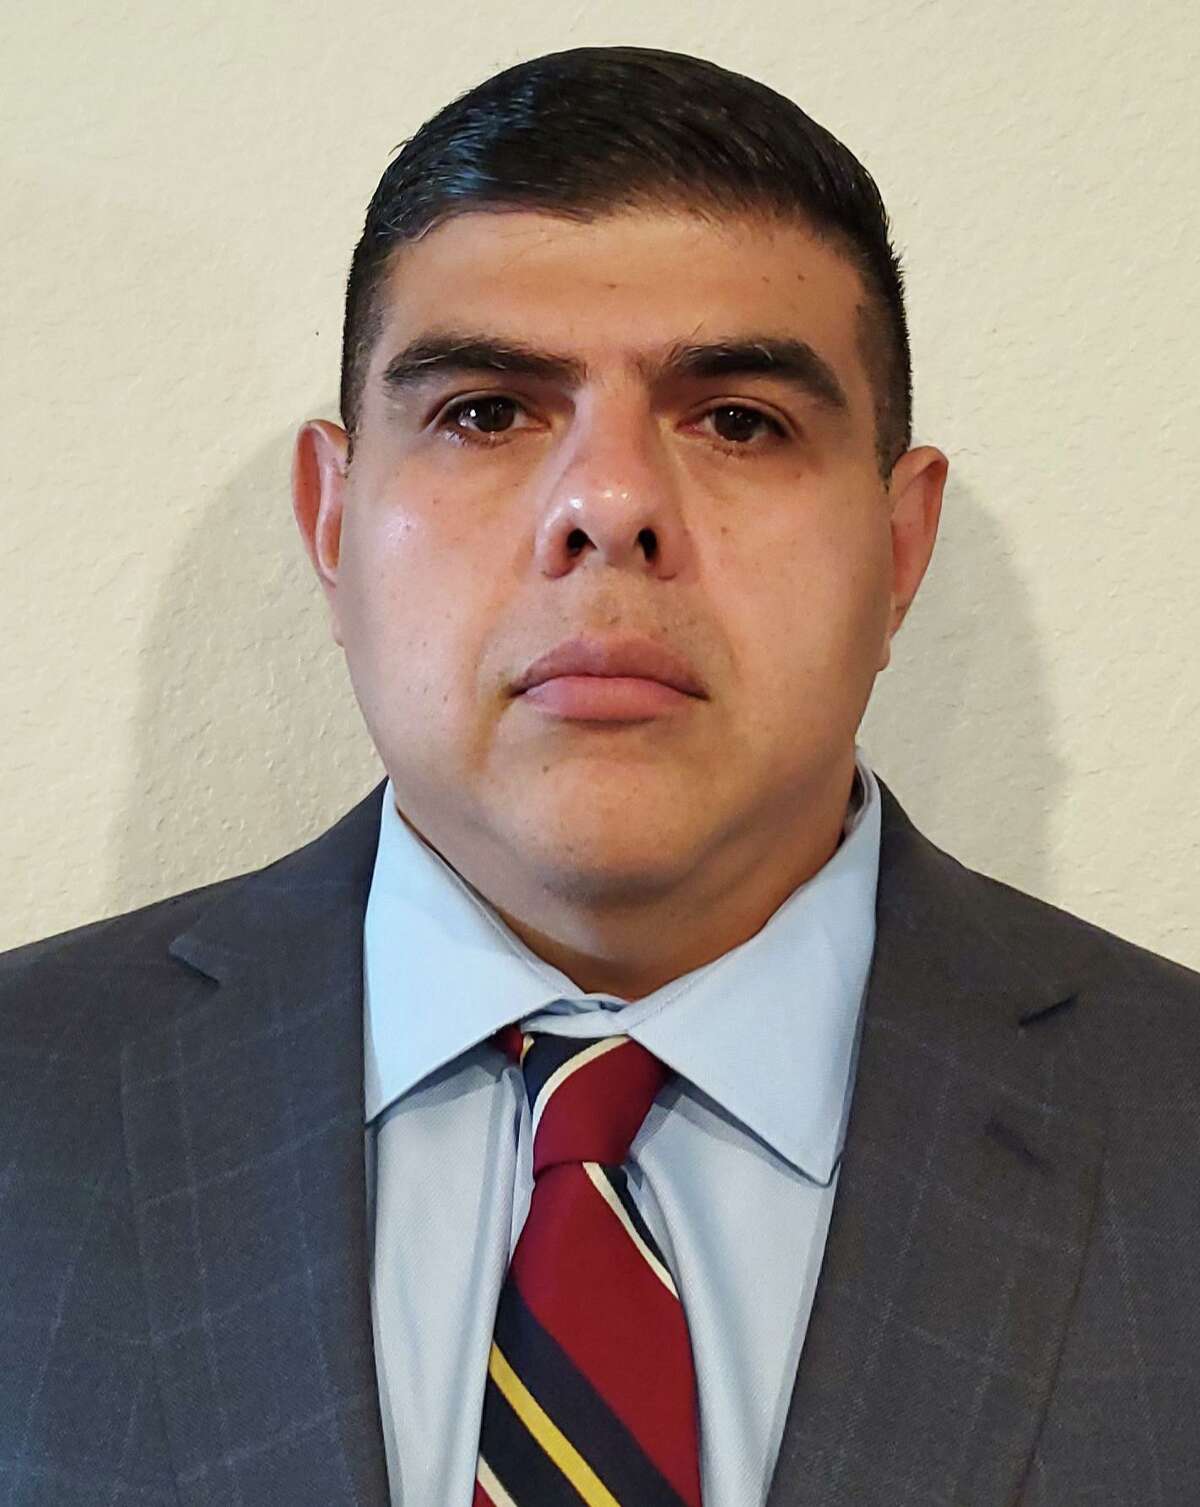 Raul Leonidas Nuques is one of seven candidates seeking three seats on the Southwest ISD board of trustees in the May 1 election.